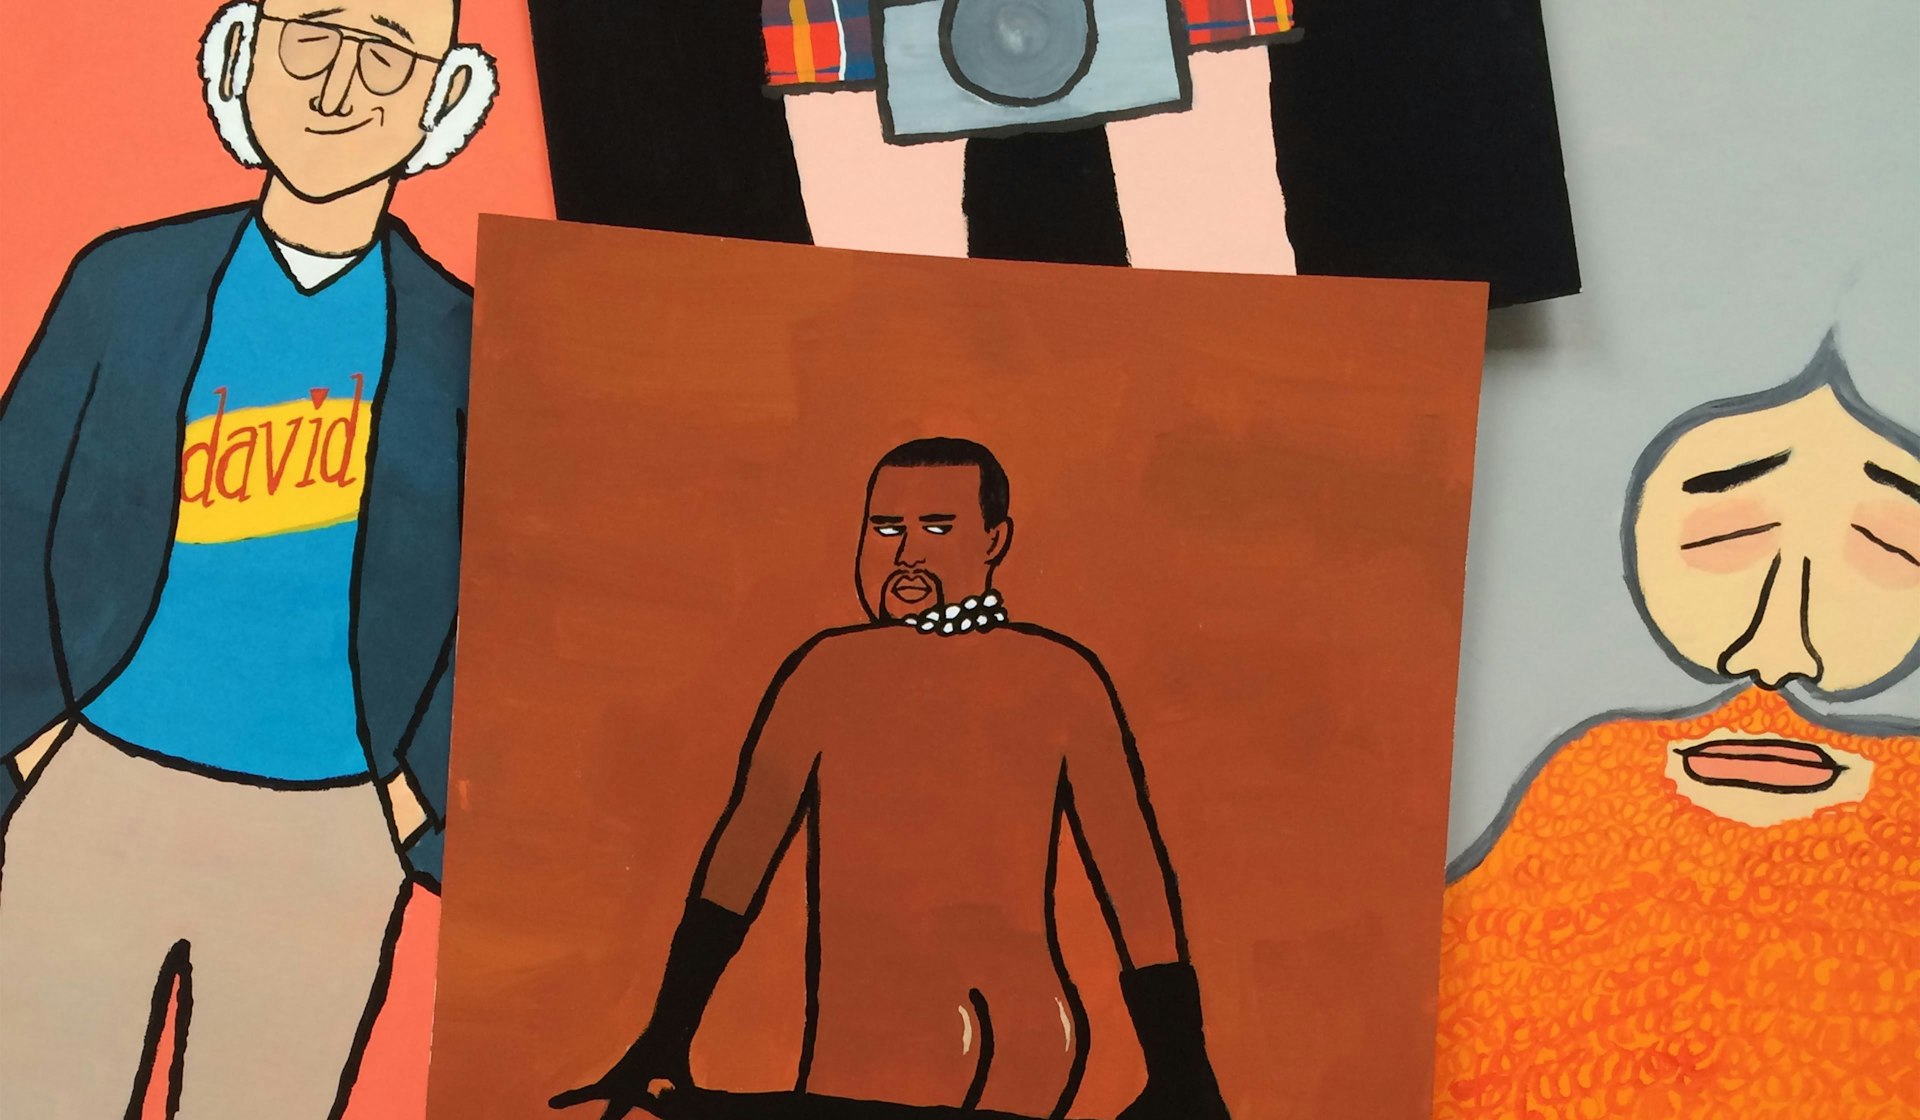 Jean Jullien’s new show playfully subverts how we present ourselves to the world